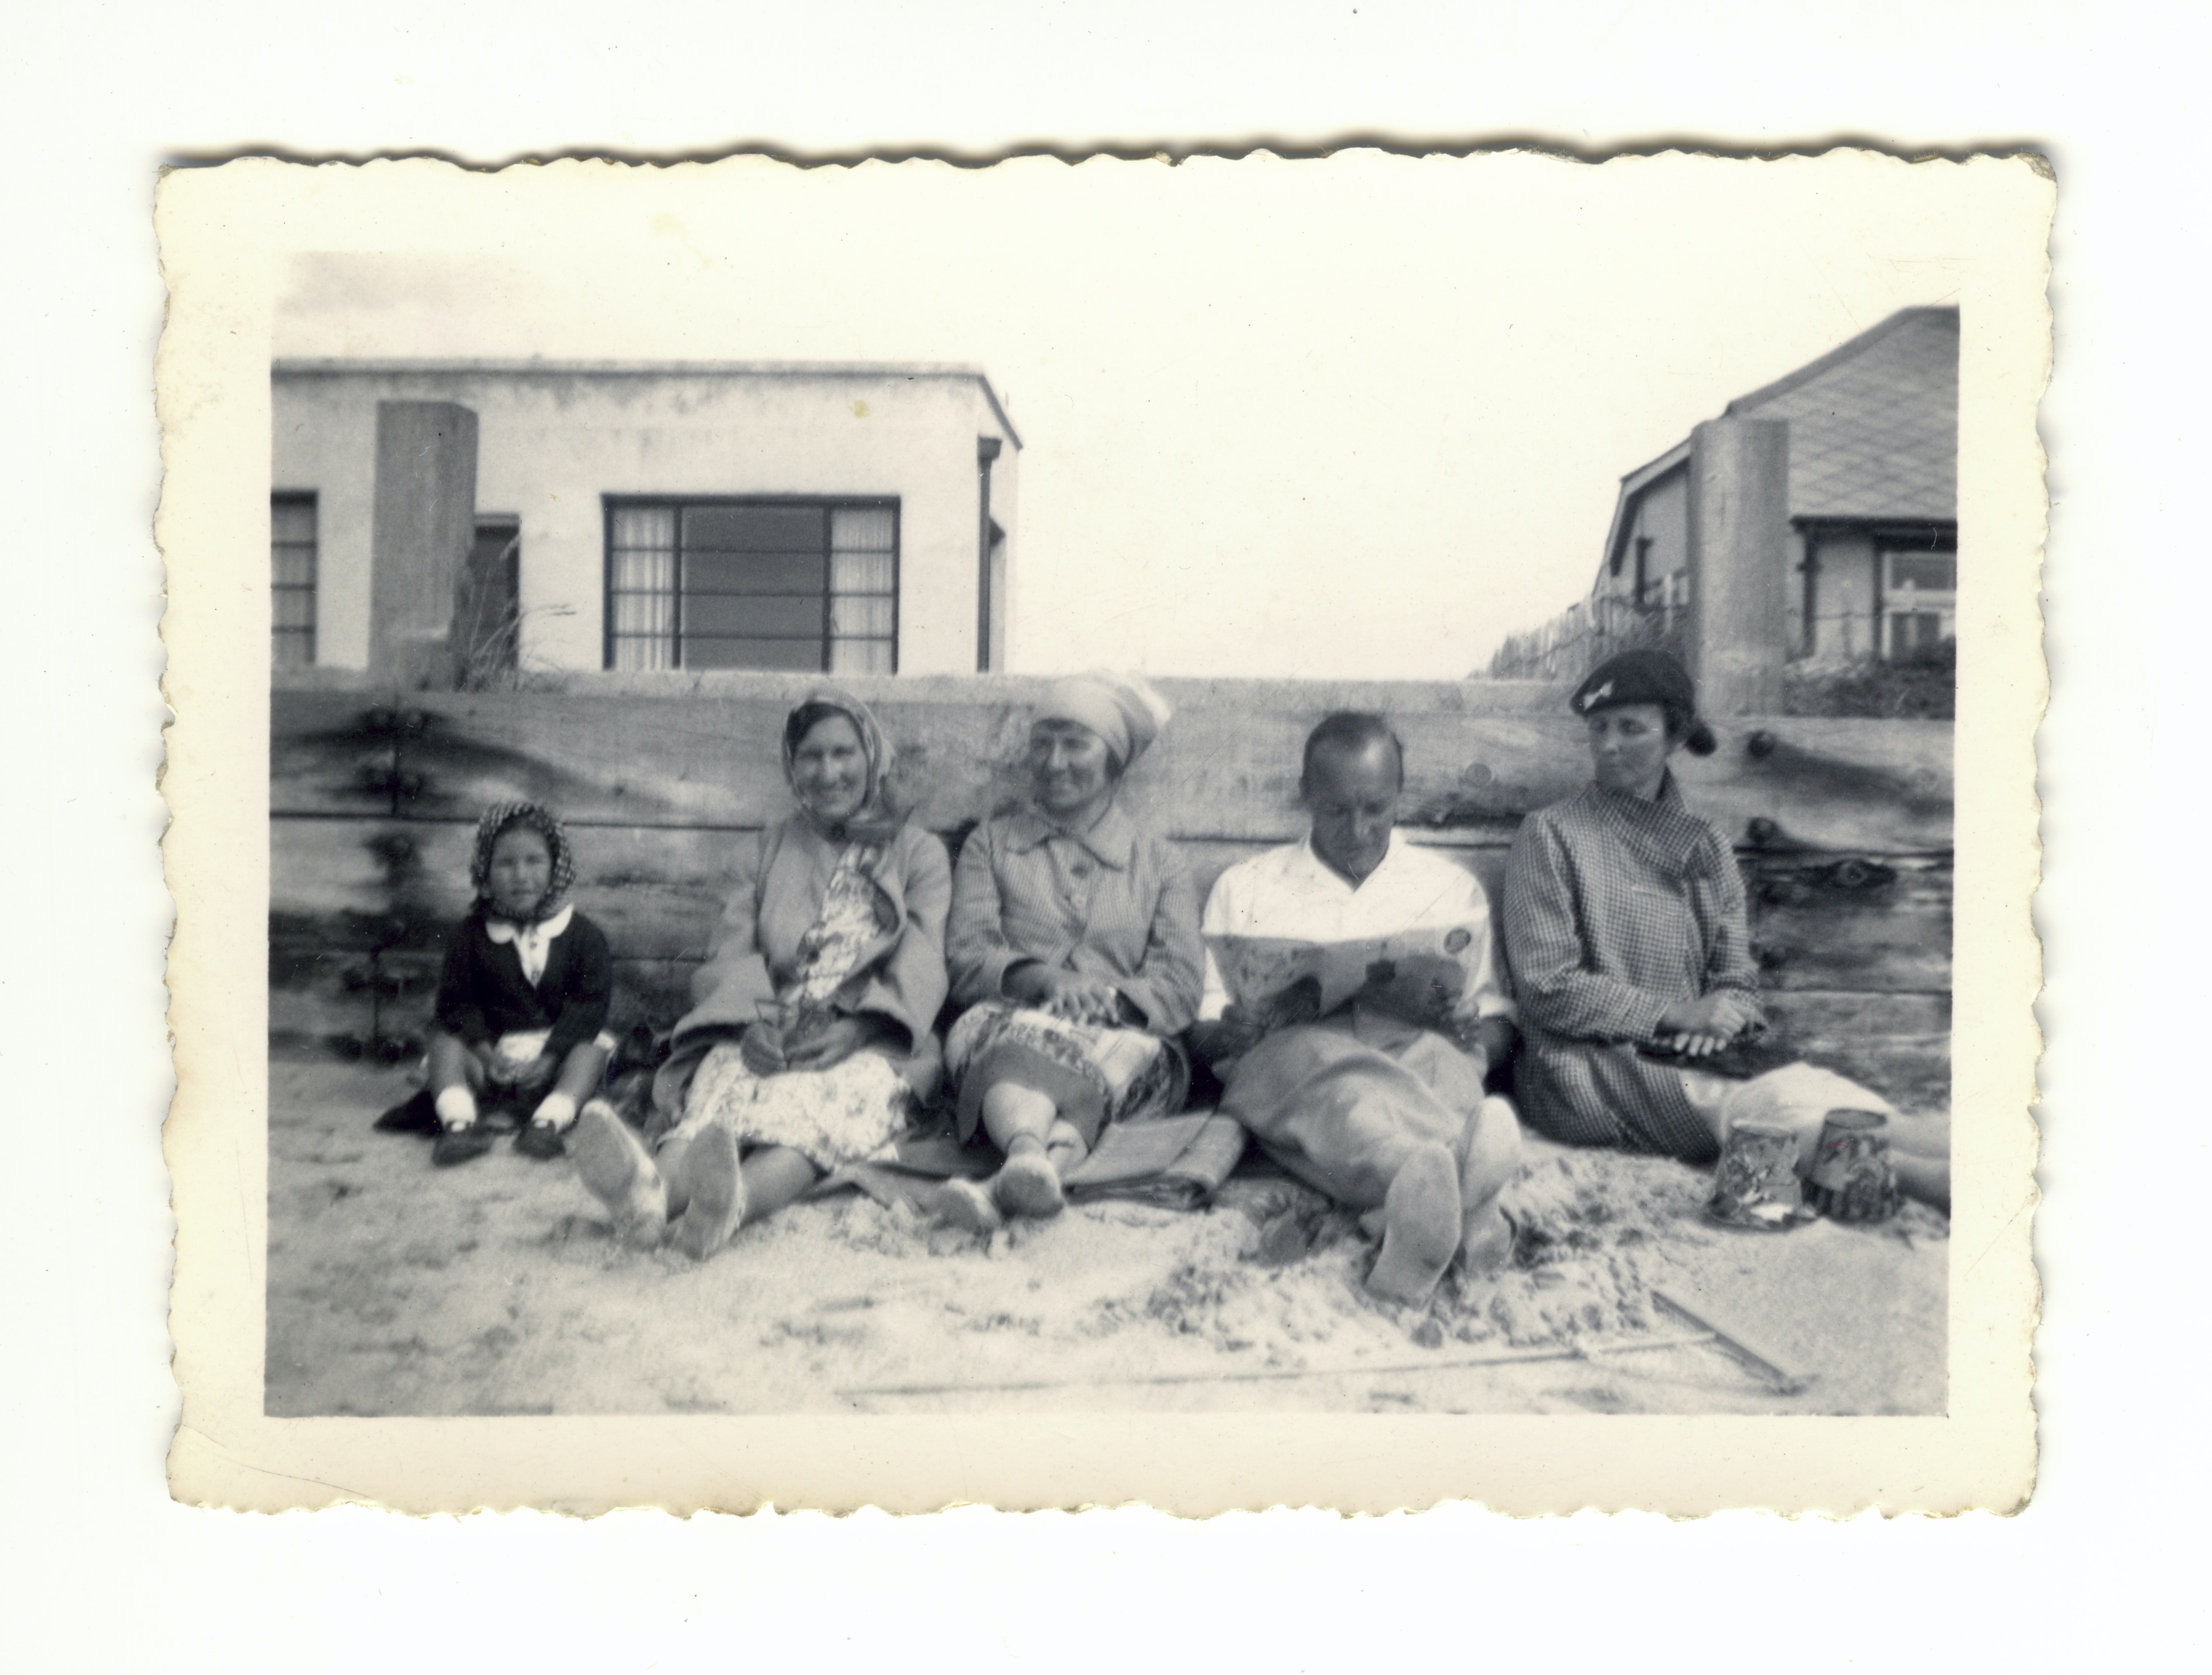 Vintage photo of a family sitting outside